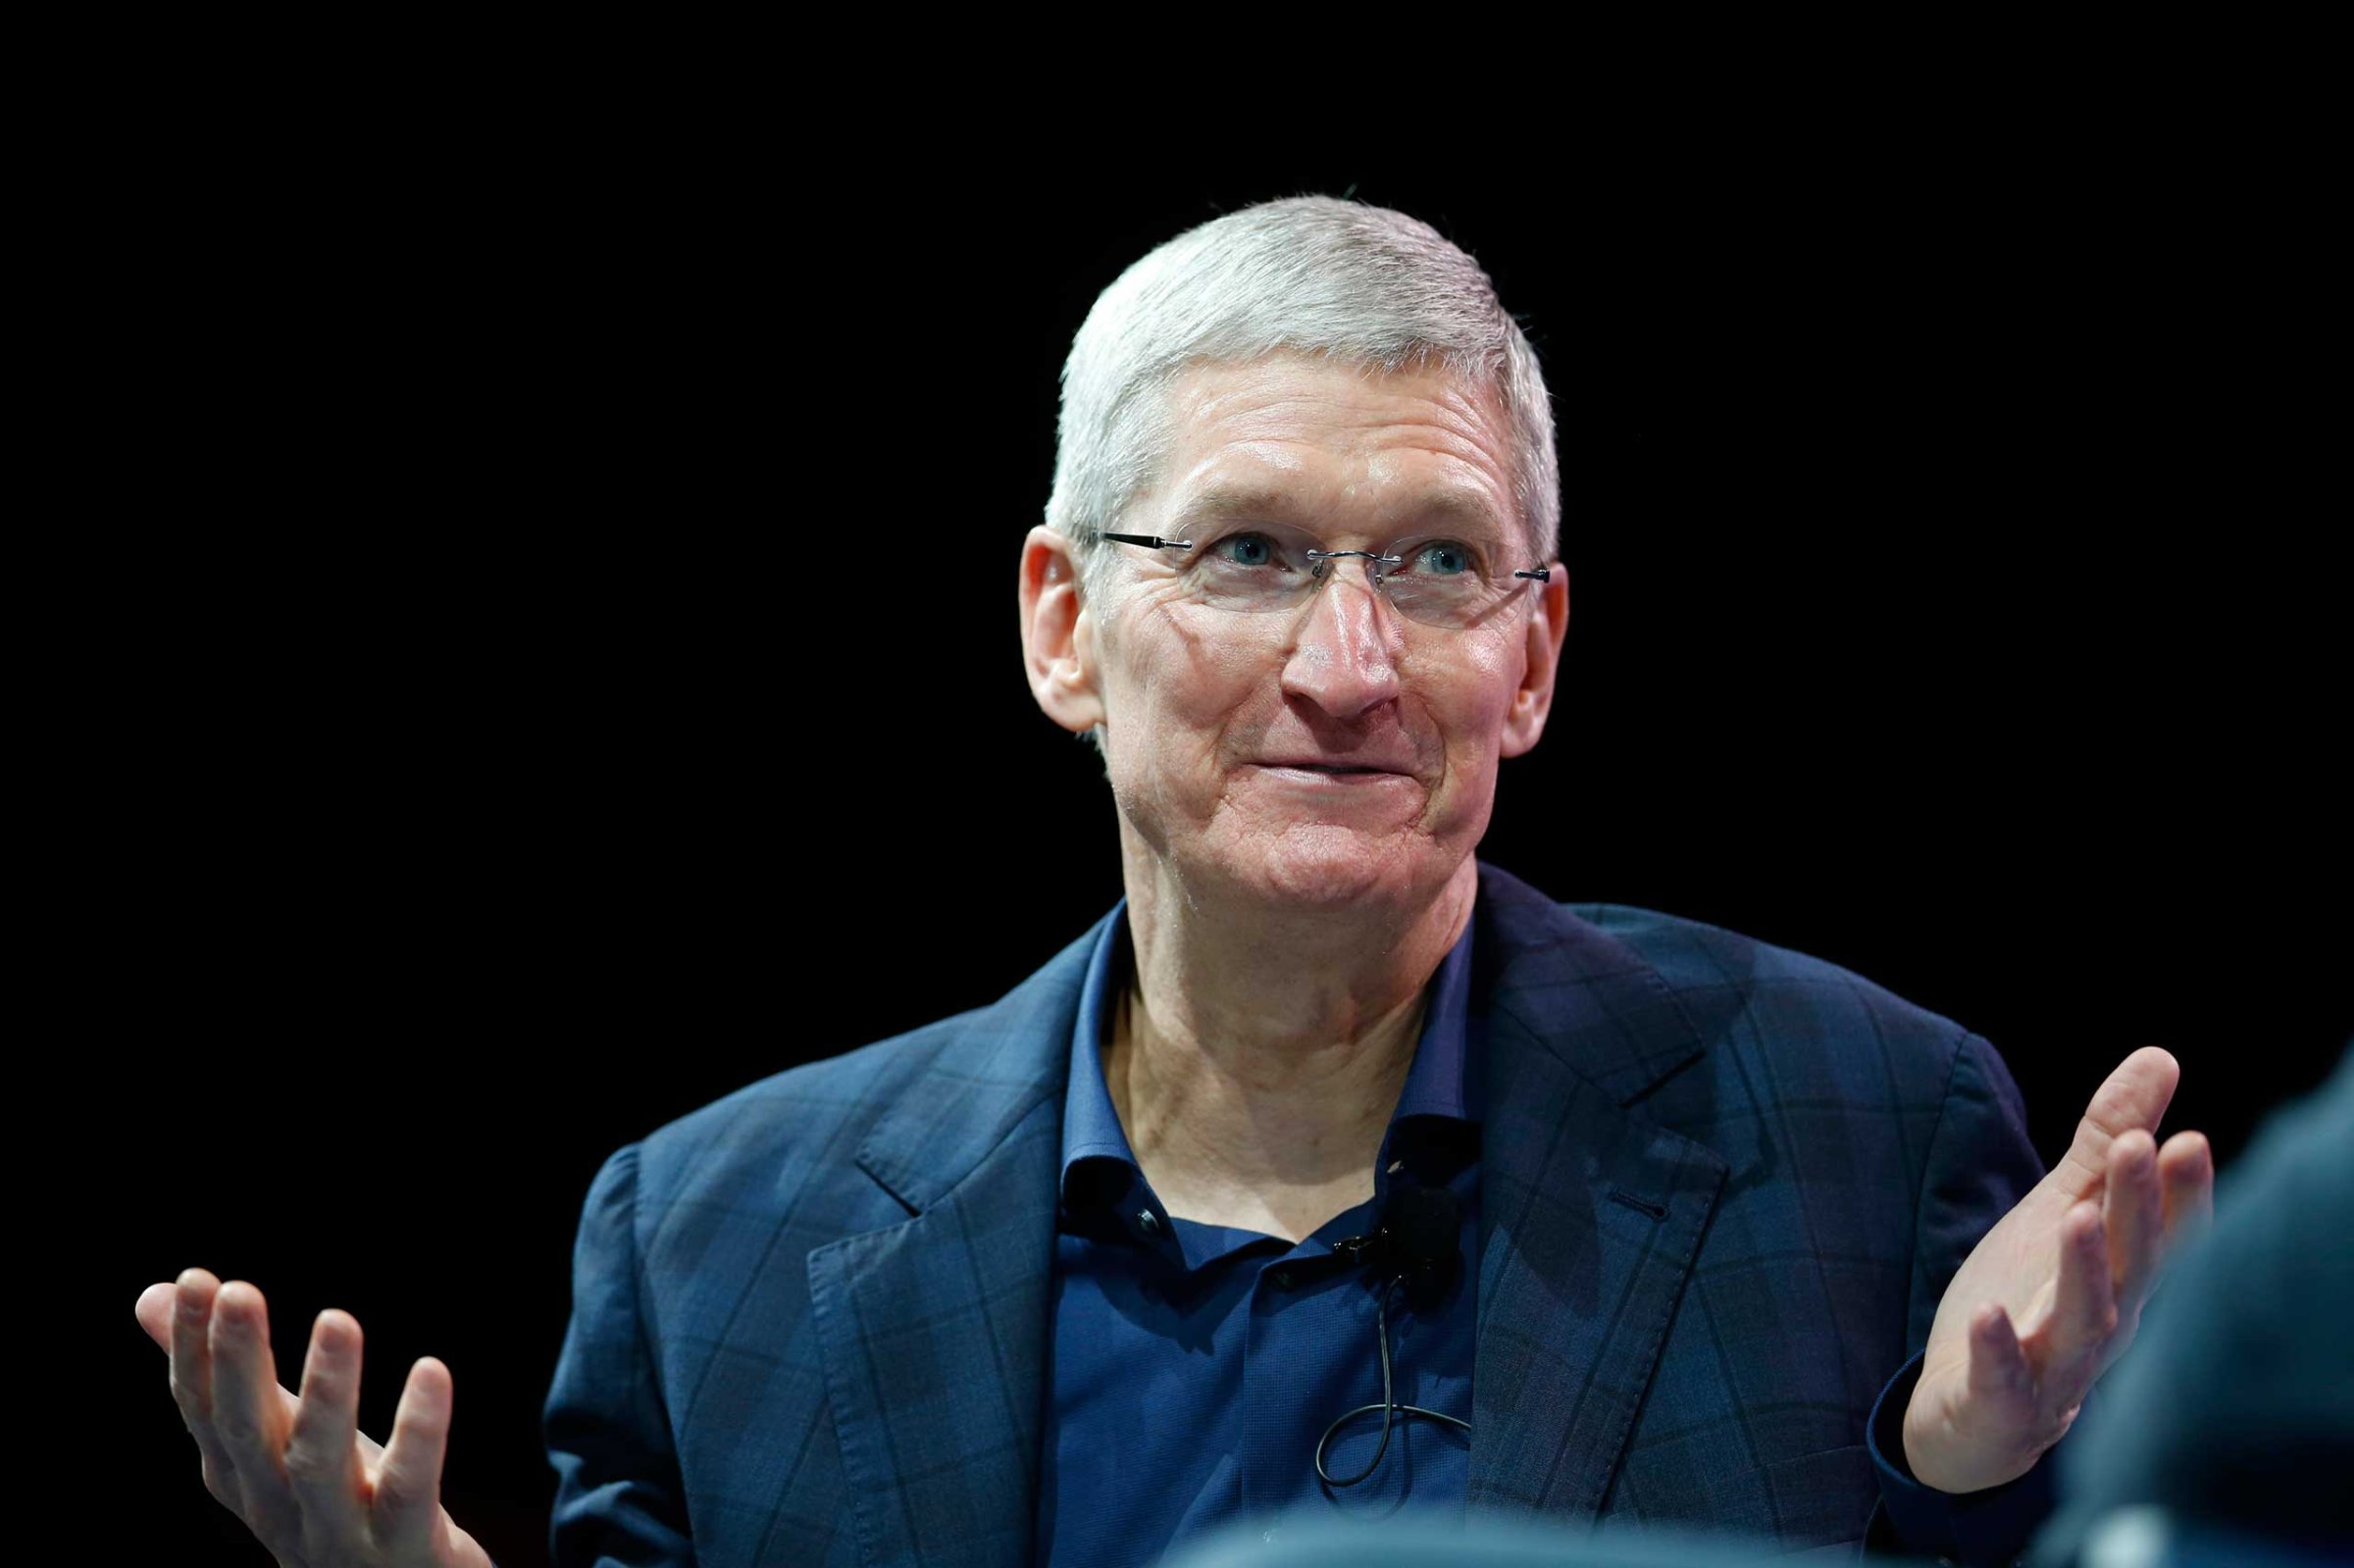 Apple CEO Tim Cook speaks at the WSJD Live conference in Laguna Beach, Calif., Oct. 27, 2014.